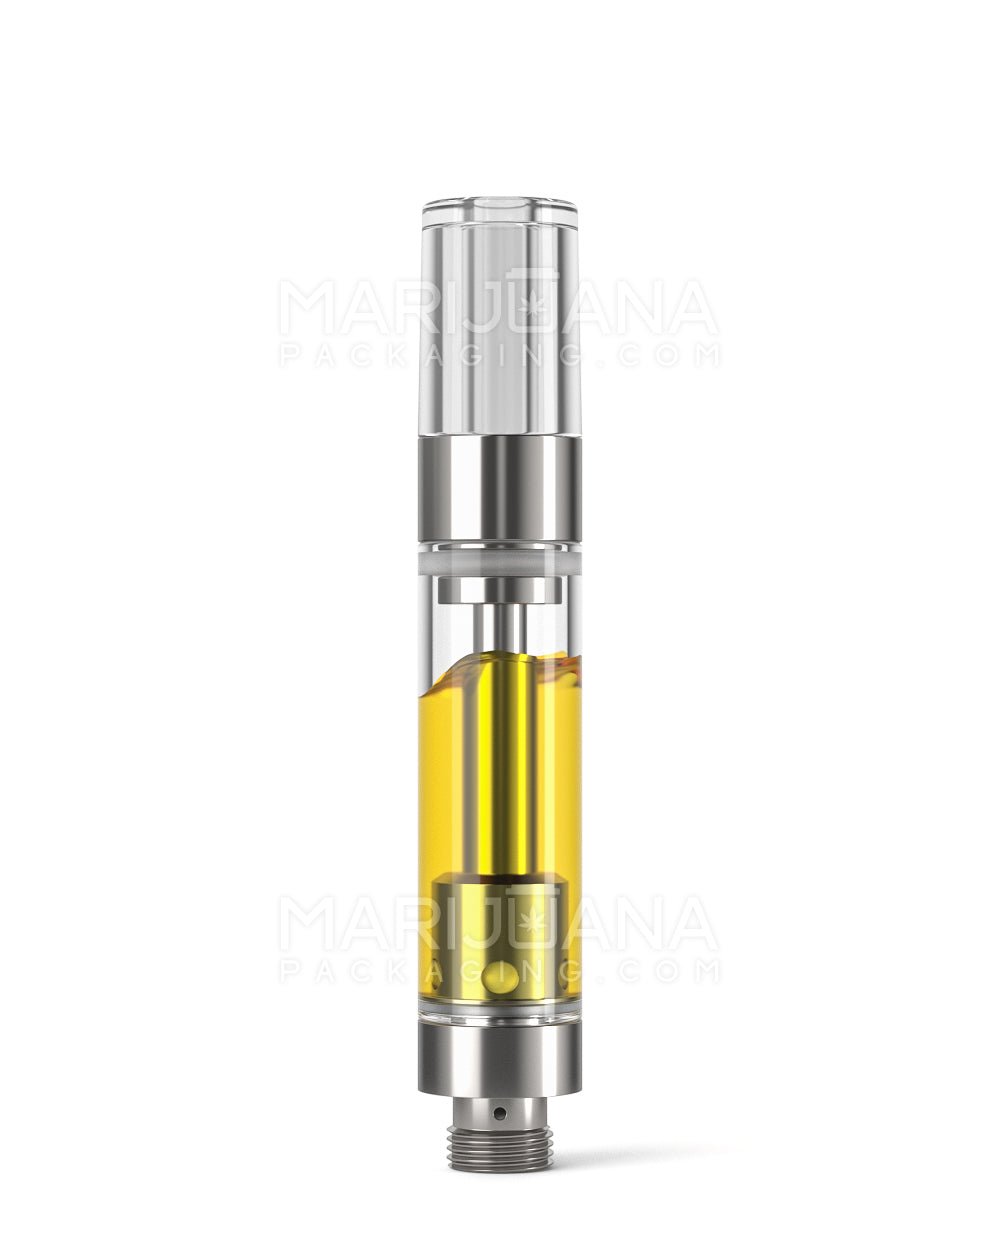 Ceramic Core Glass Vape Cartridge with Round Clear Plastic Mouthpiece | 1mL - Press On - 1200 Count - 2